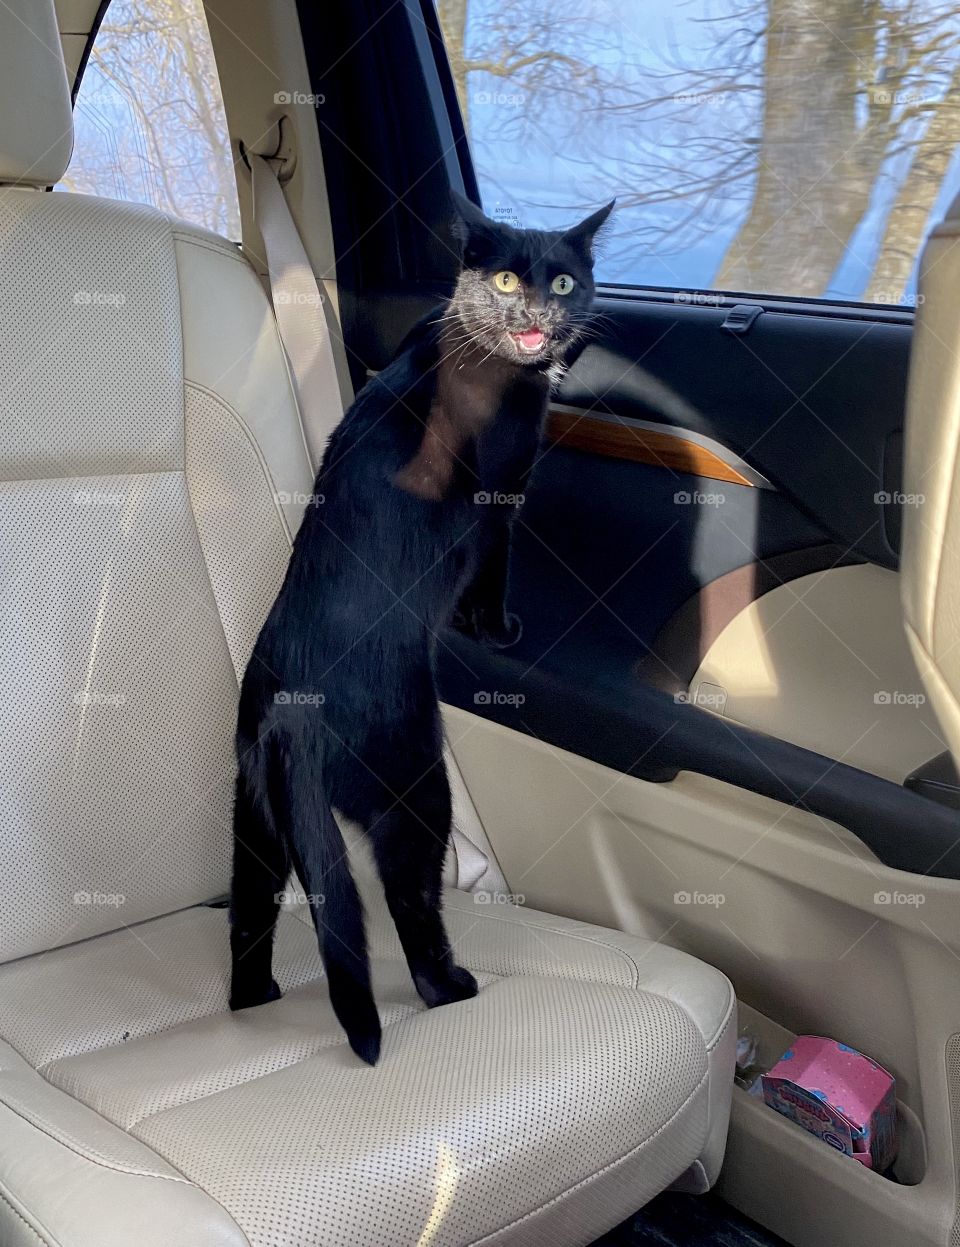 Silly black cat standing on car backseat trying to tell us something makes for pretty fun photo!! 